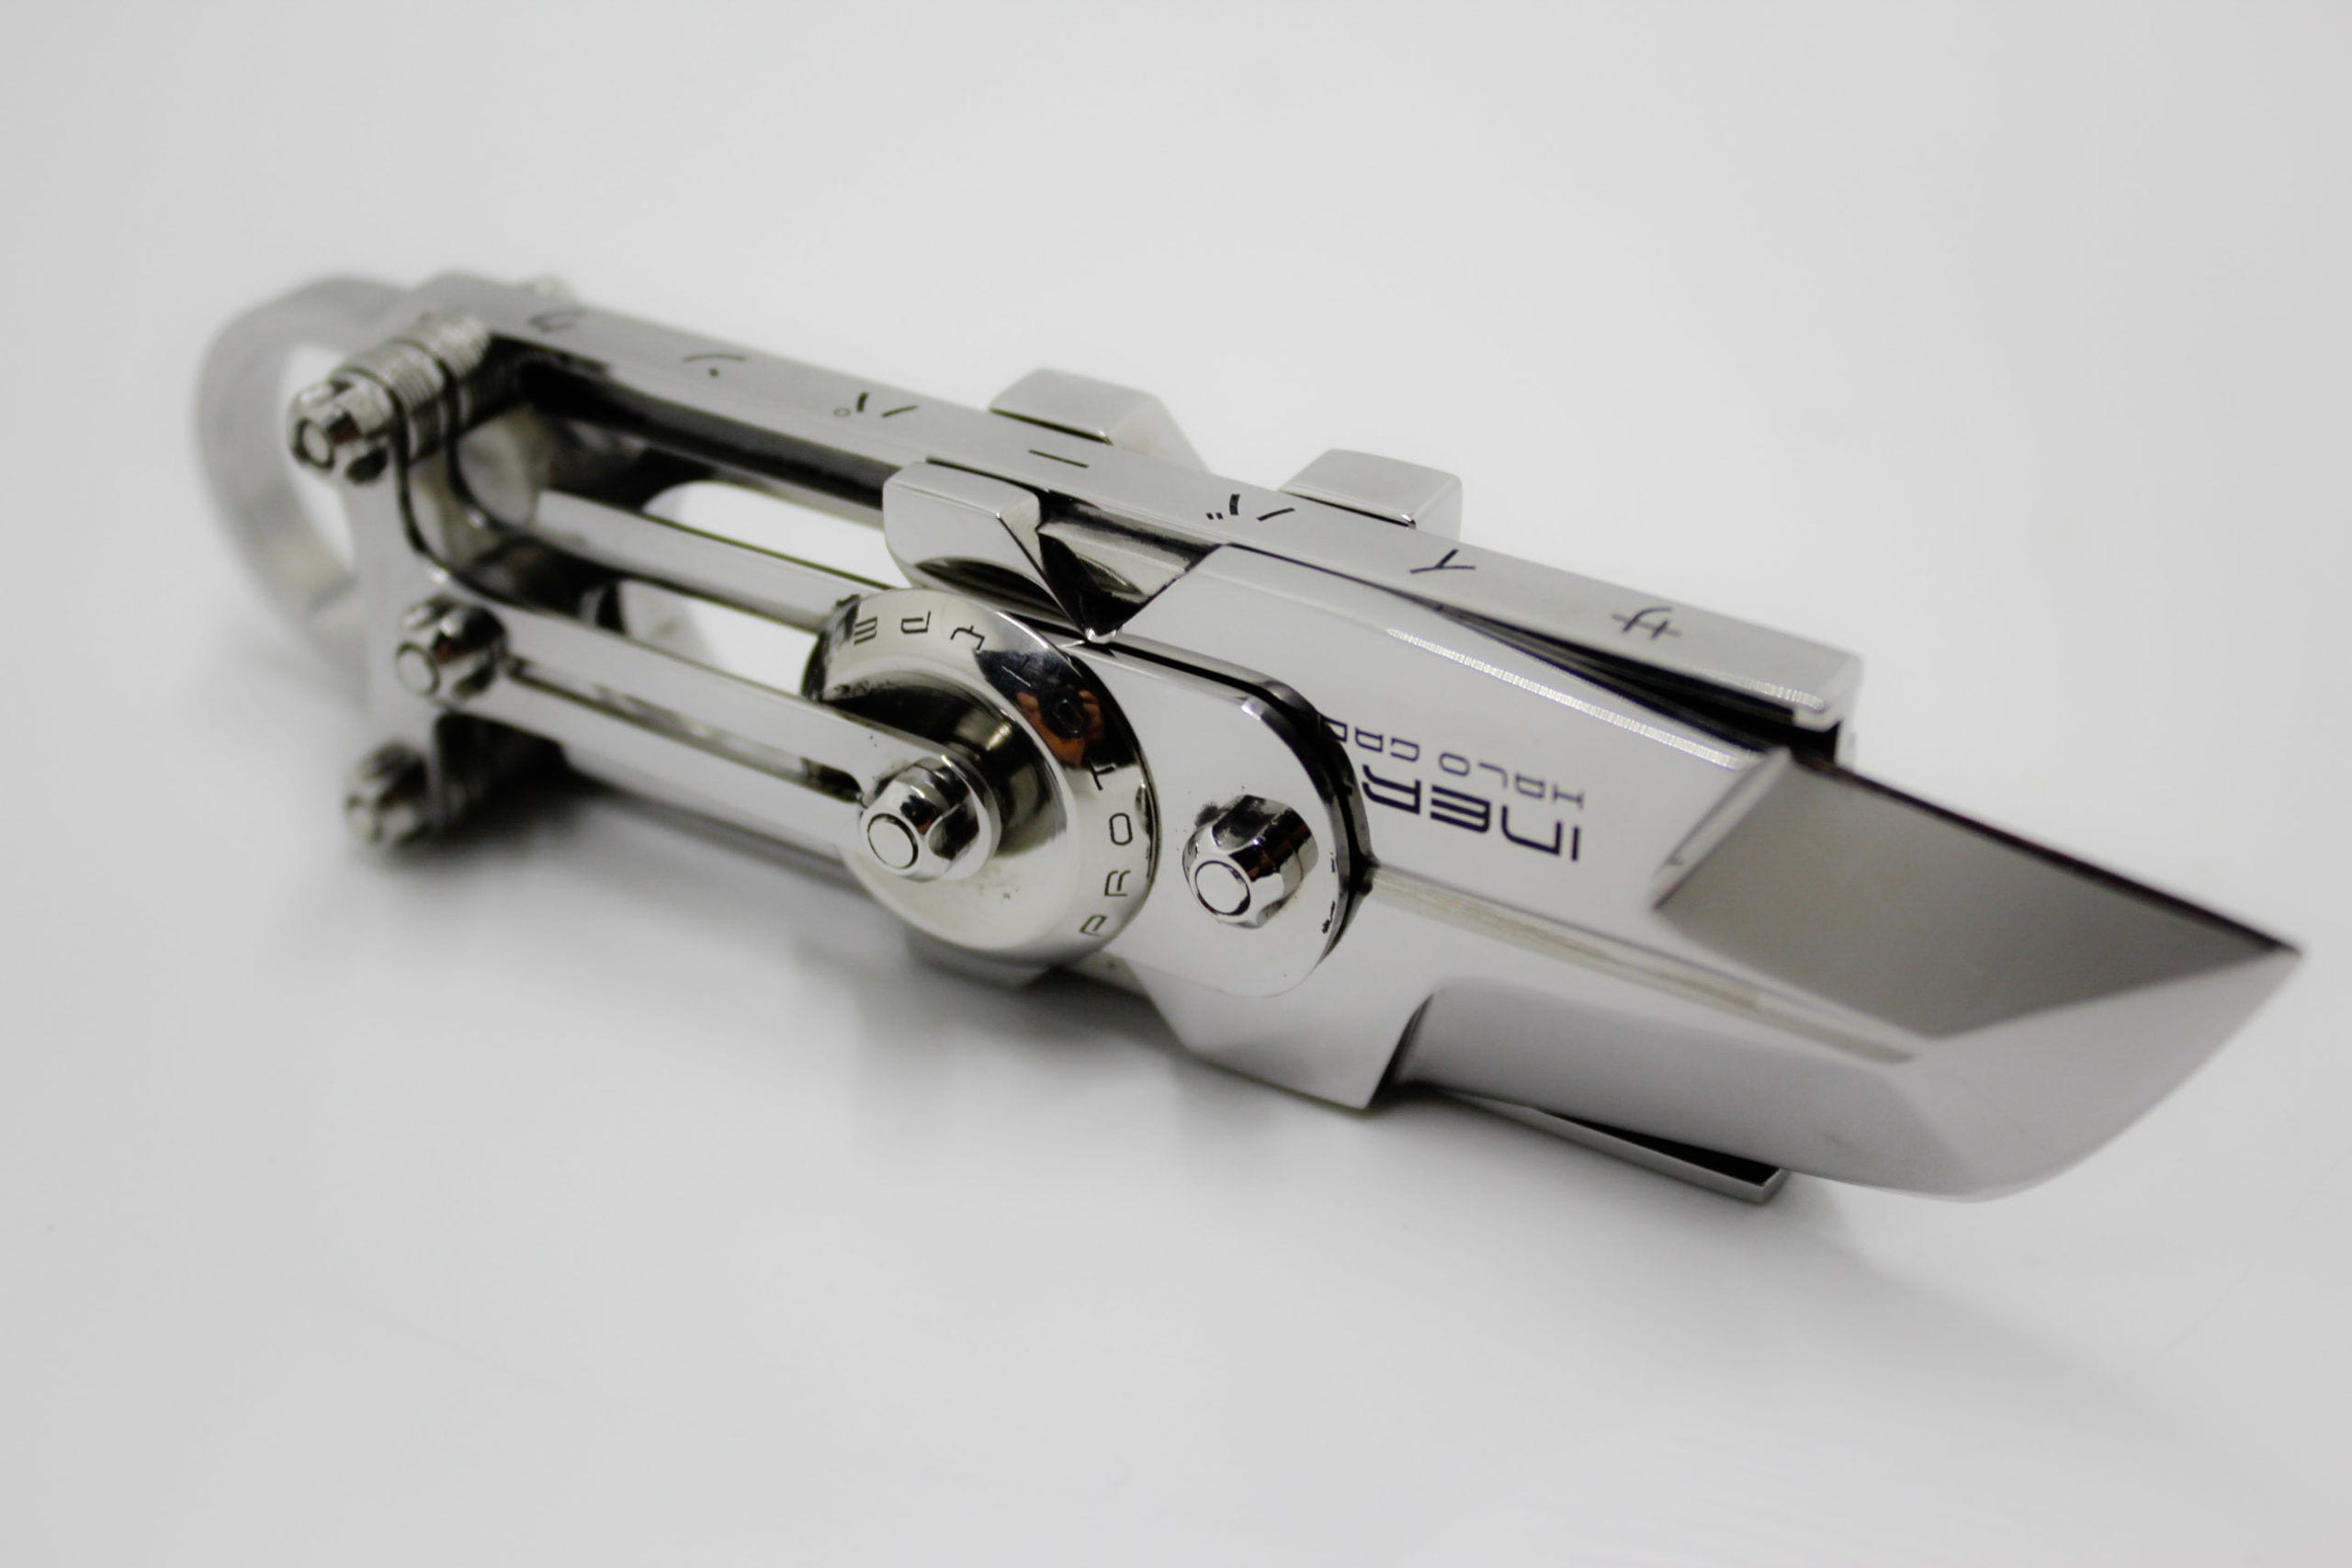 Need A Cyberpunk Knife In Your Life? RoboRazer's Inertix Exoblade Makes The Cut